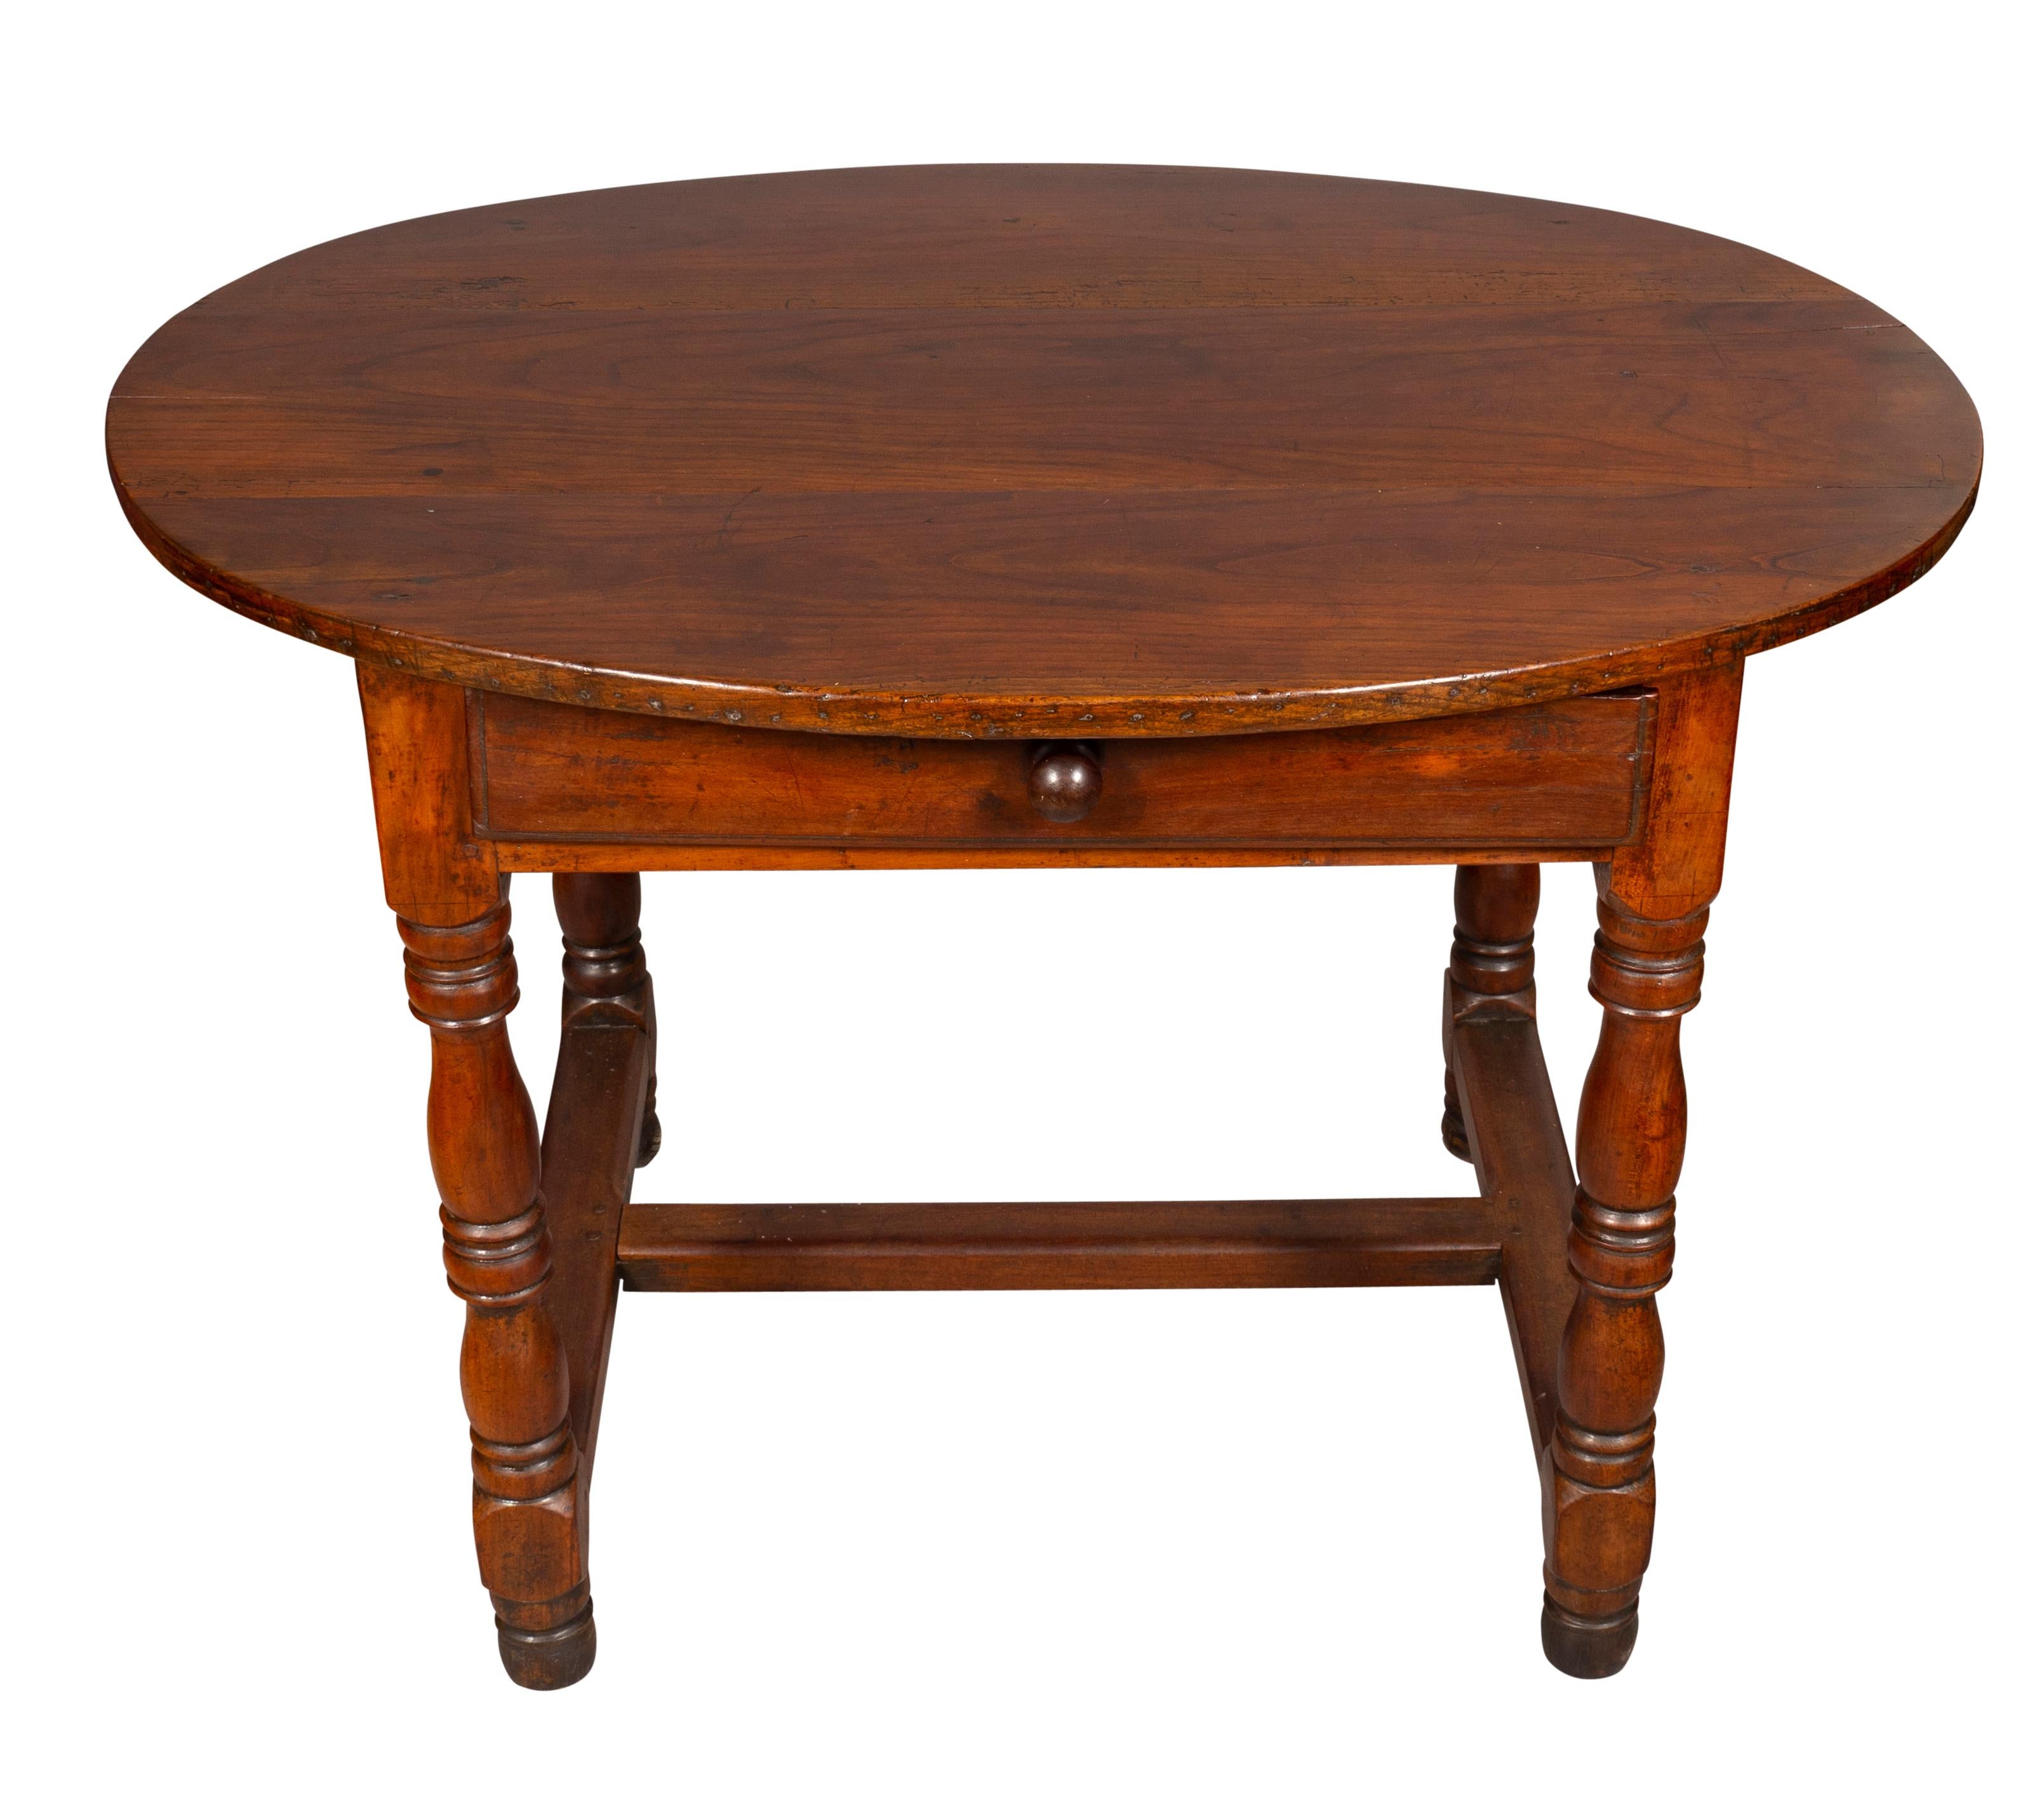 With an oval top possible replaced or reshaped over a drawer and raised on turned legs joined by an H form stretcher.